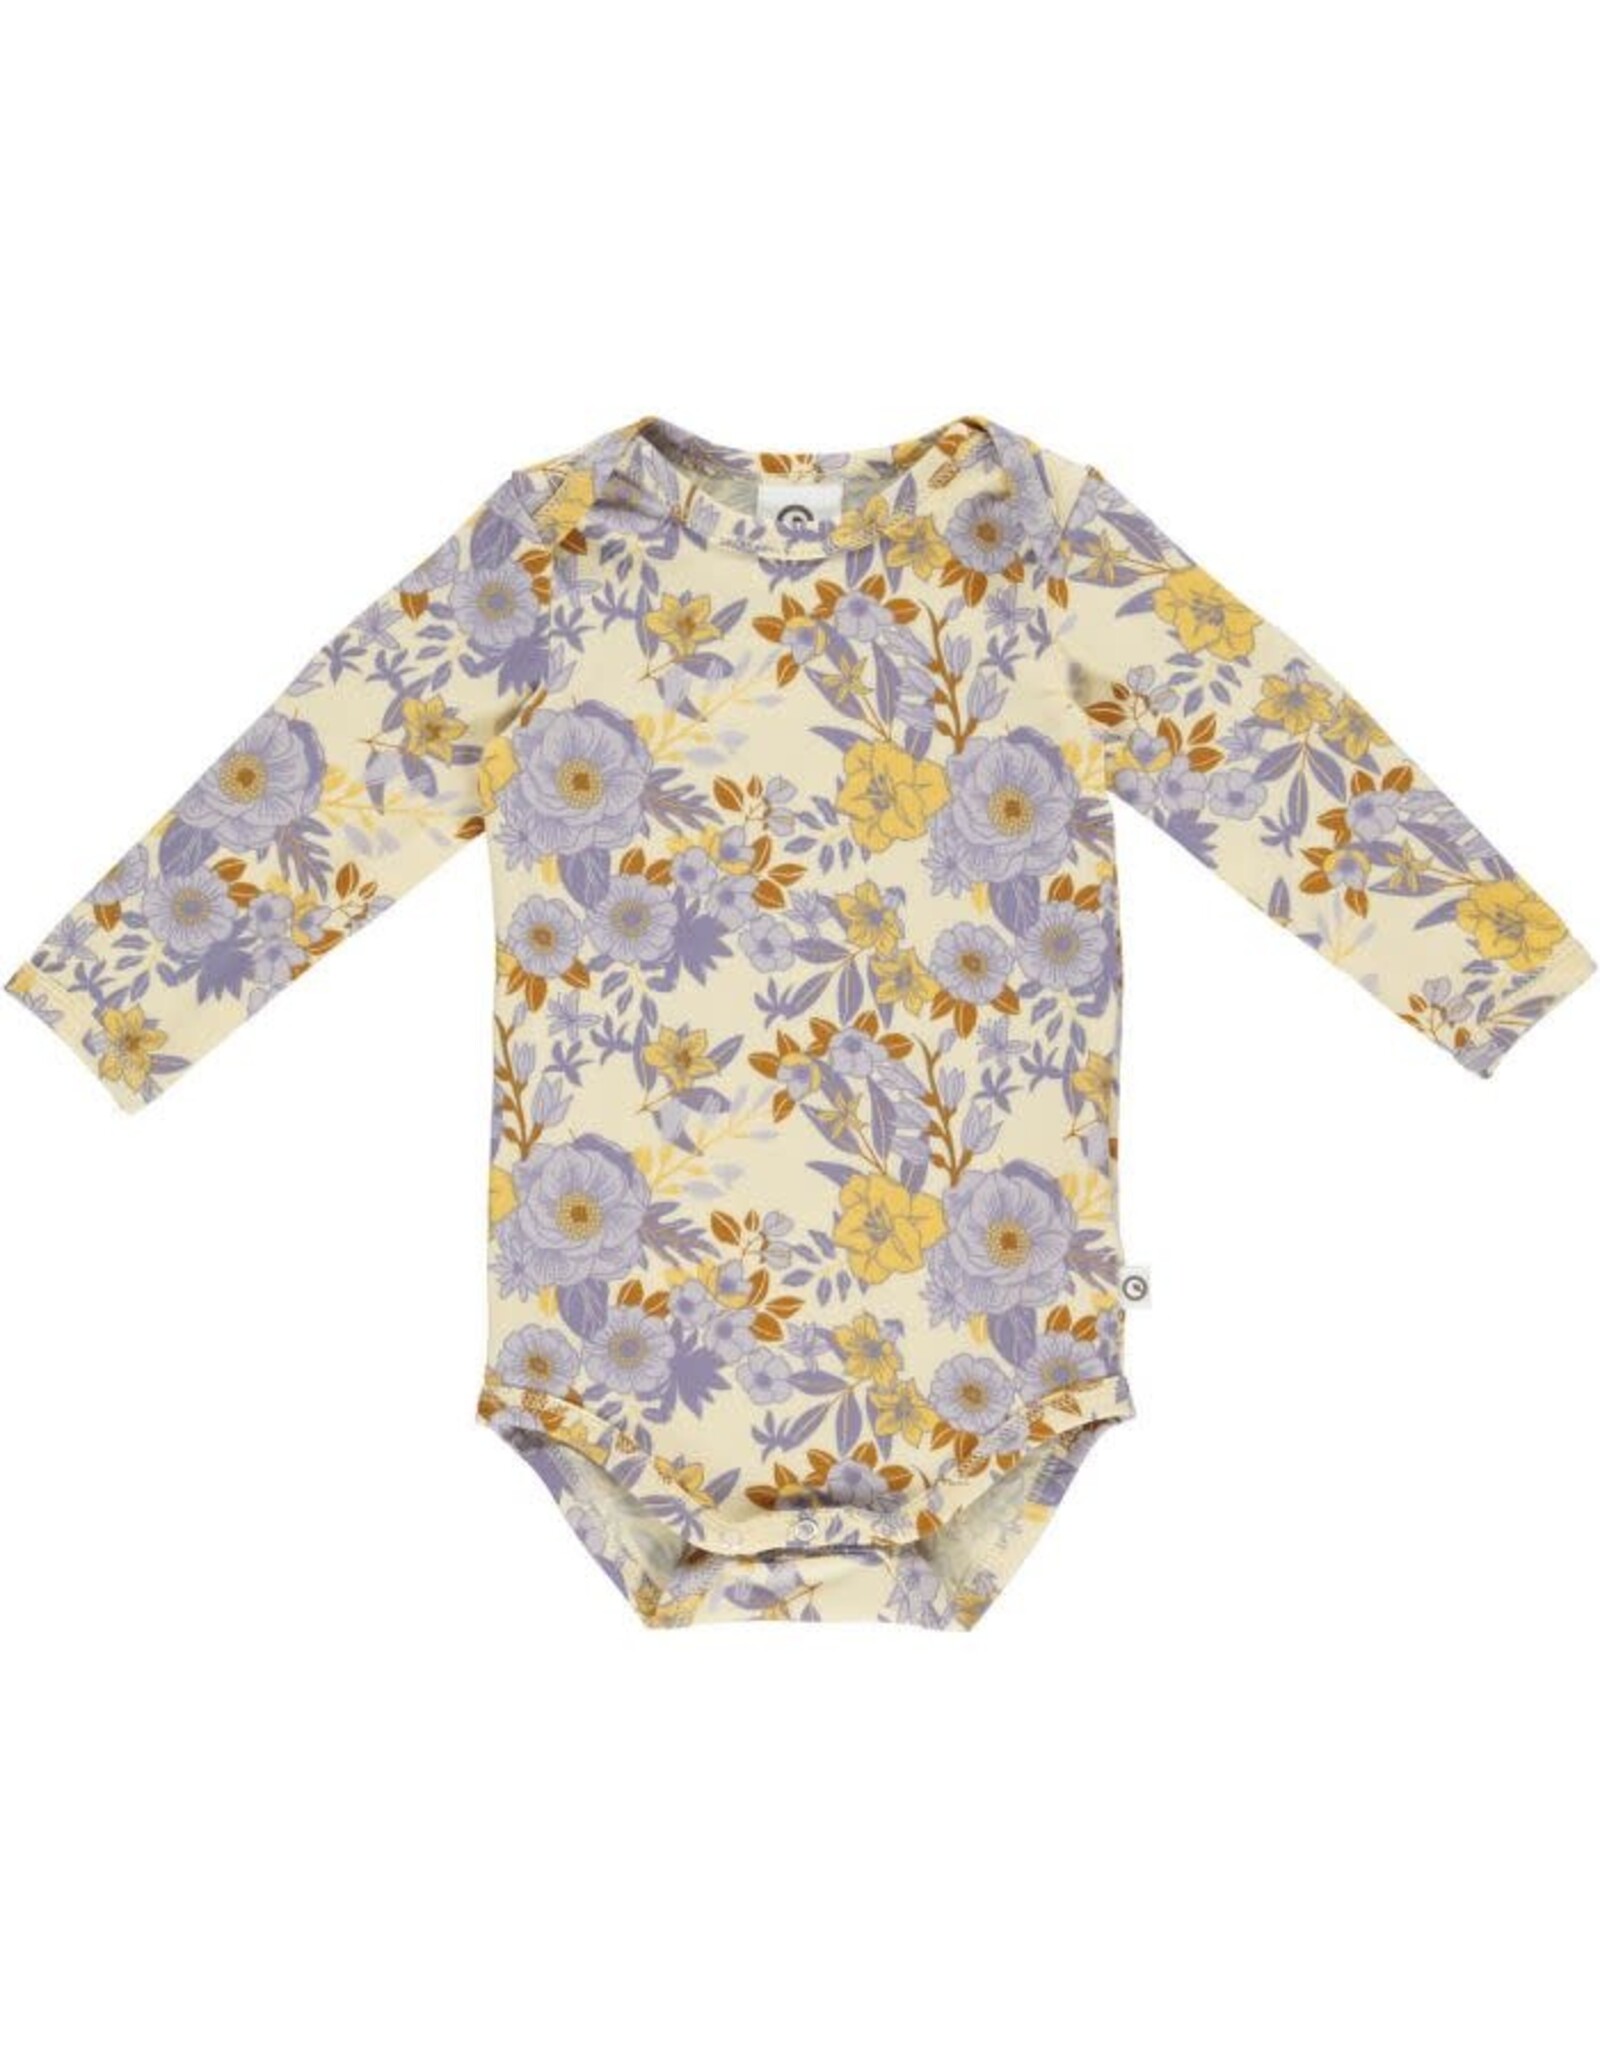 Green Cotton Cardamine Bodysuit with Floral Print